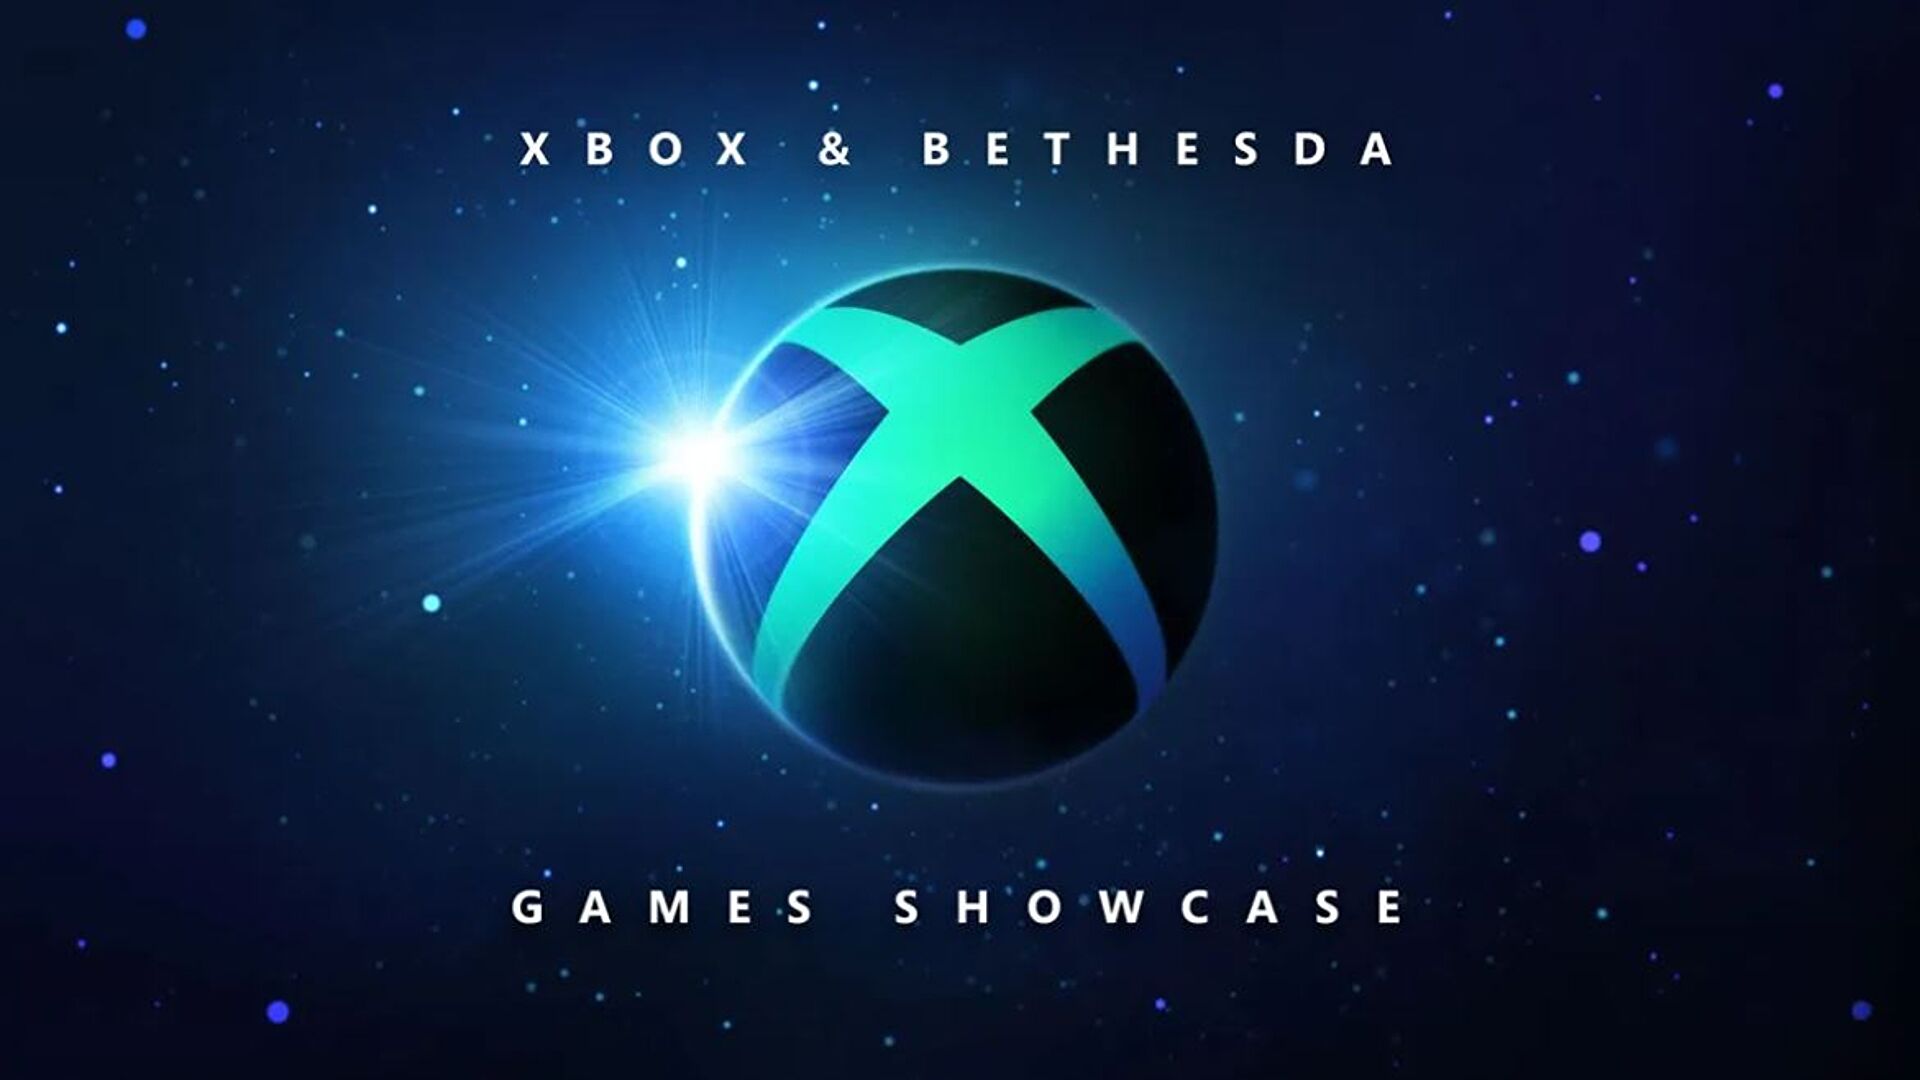 Microsoft set a date for 2022's Xbox and Bethesda Games Showcase